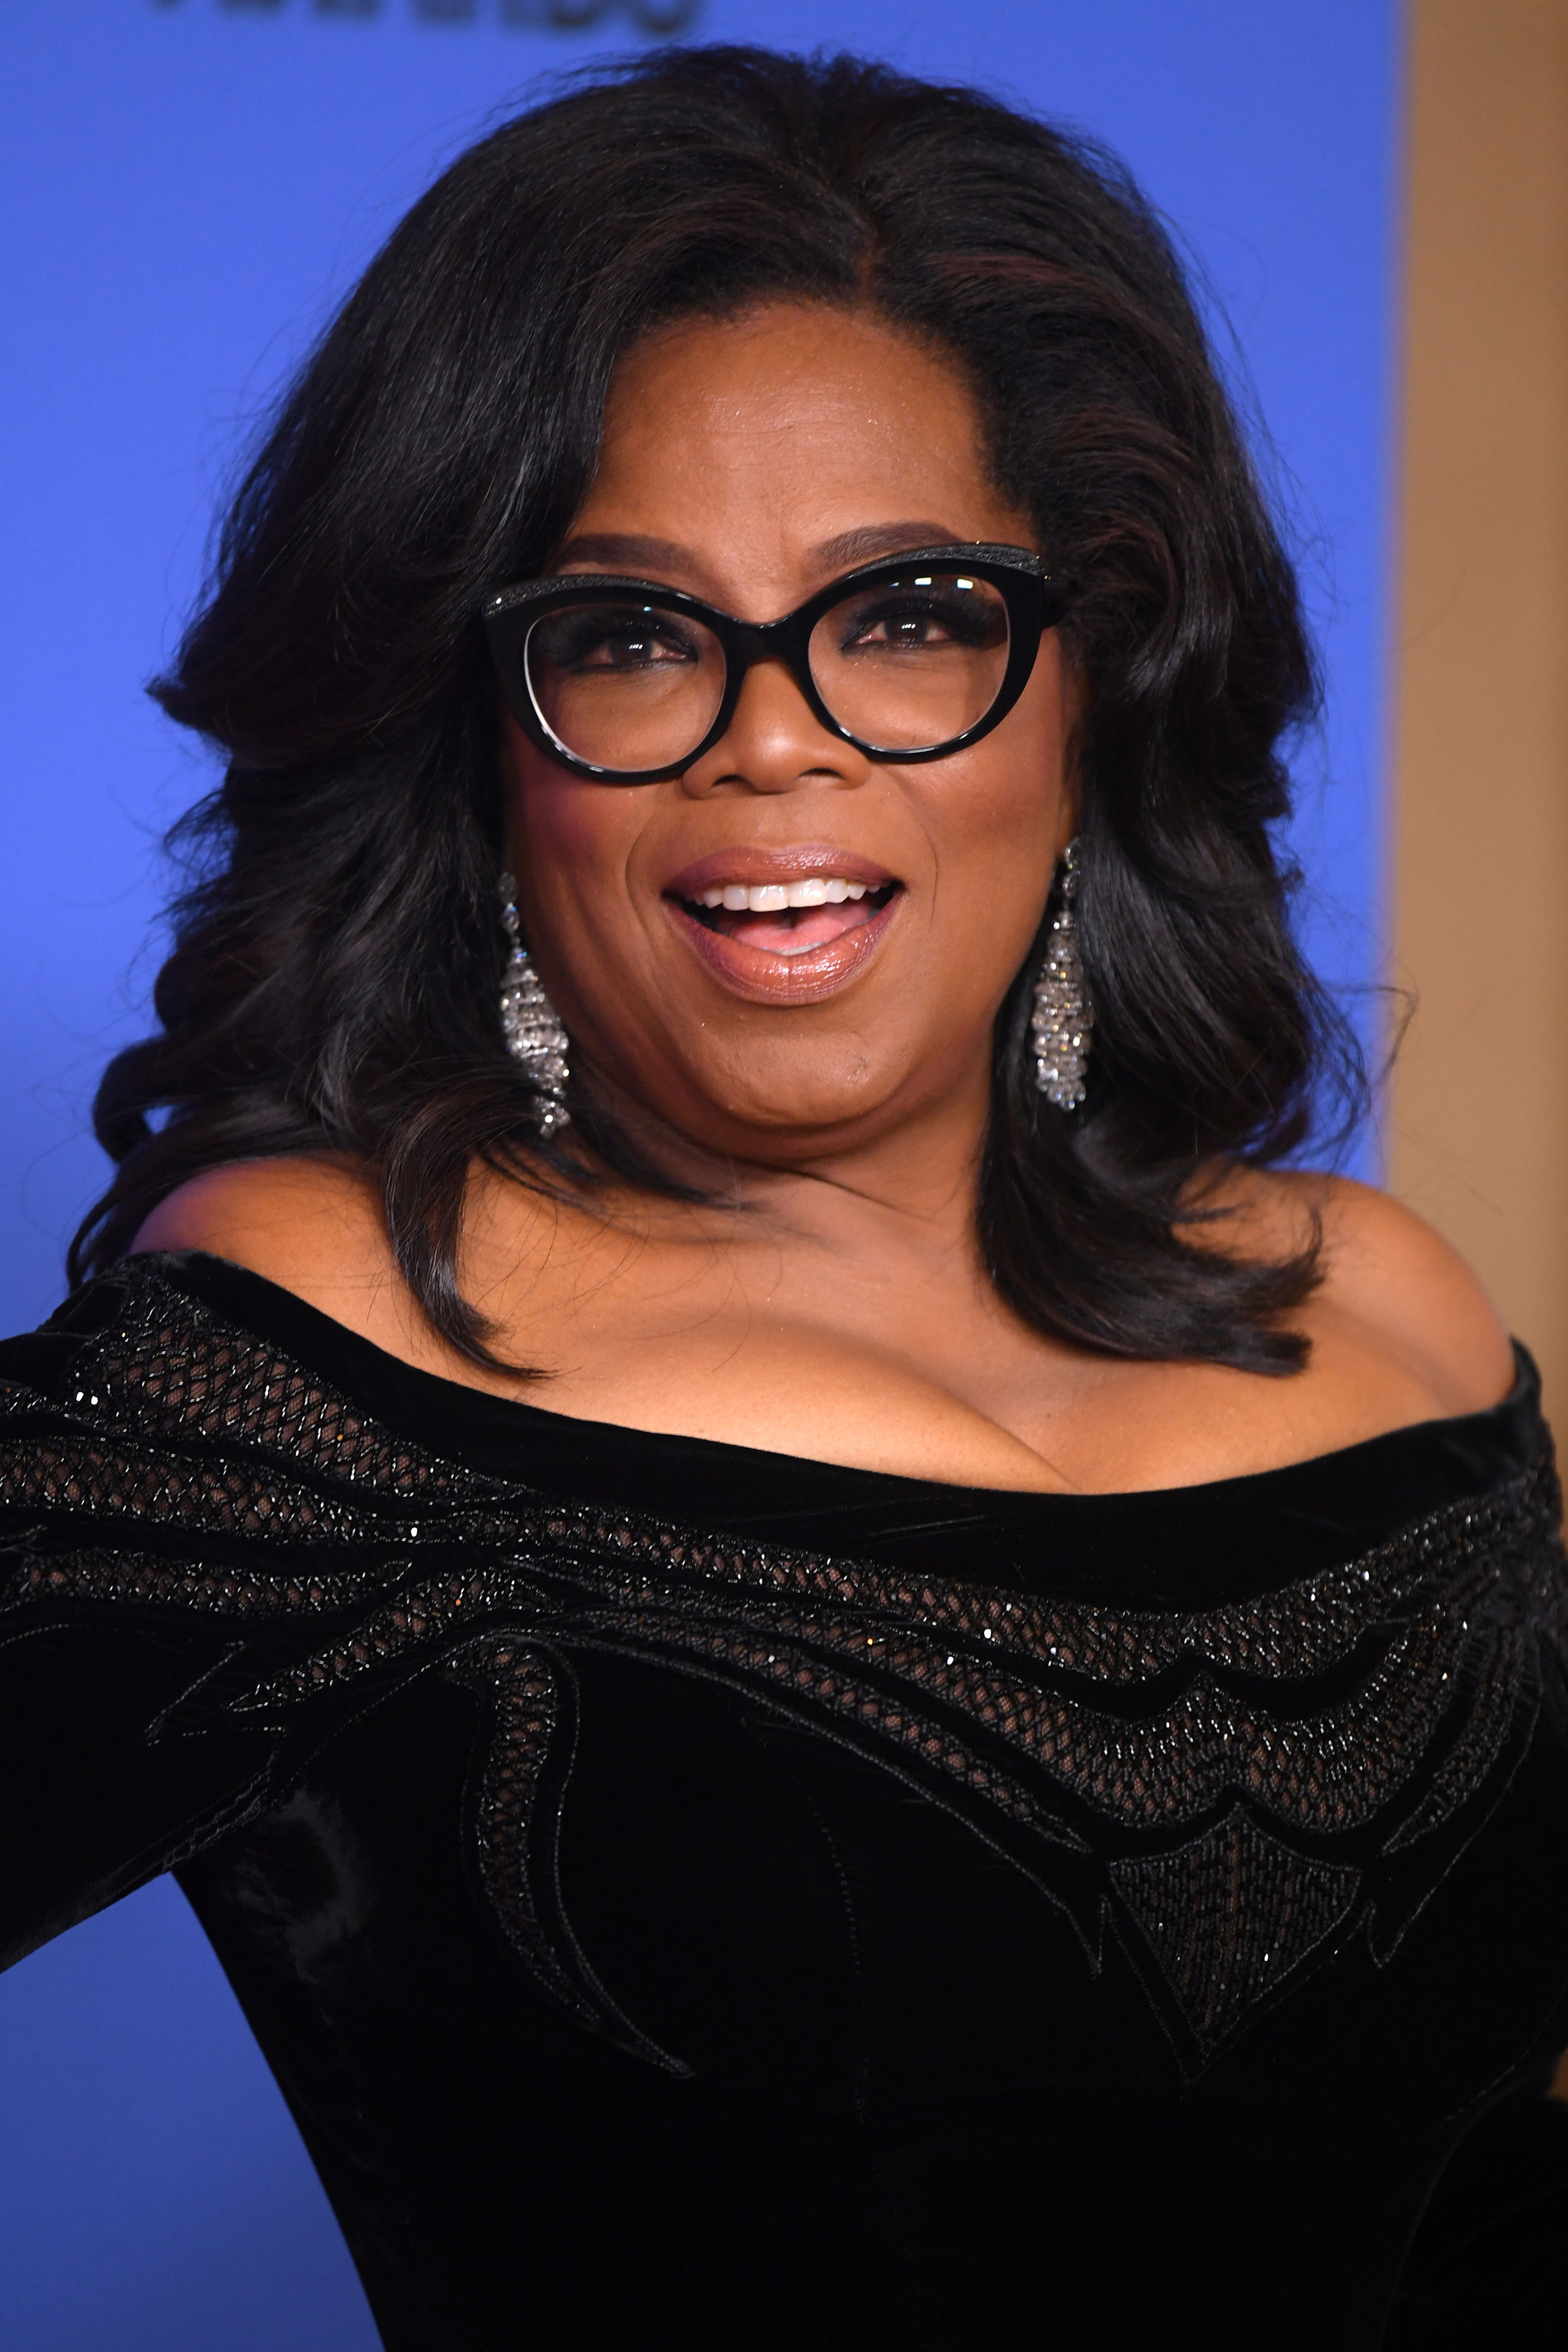 <p>When <a href="https://www.wonderwall.com/celebrity/profiles/overview/oprah-winfrey-434.article">Oprah Winfrey</a> launched her production company, Harpo Studios, in 1986, she became the first Black woman (and third woman overall, after silent film star Mary Pickford and comedy legend Lucille Ball) to run her own Hollywood studio. But that's not the only way the media mogul has made history: When her eponymous television network, OWN, launched in 2011, it became the first and only network named for and inspired by a single individual. And in 2014, she became the first Black female producer to score an Academy Award nomination for best picture thanks to her work on "Selma."</p>